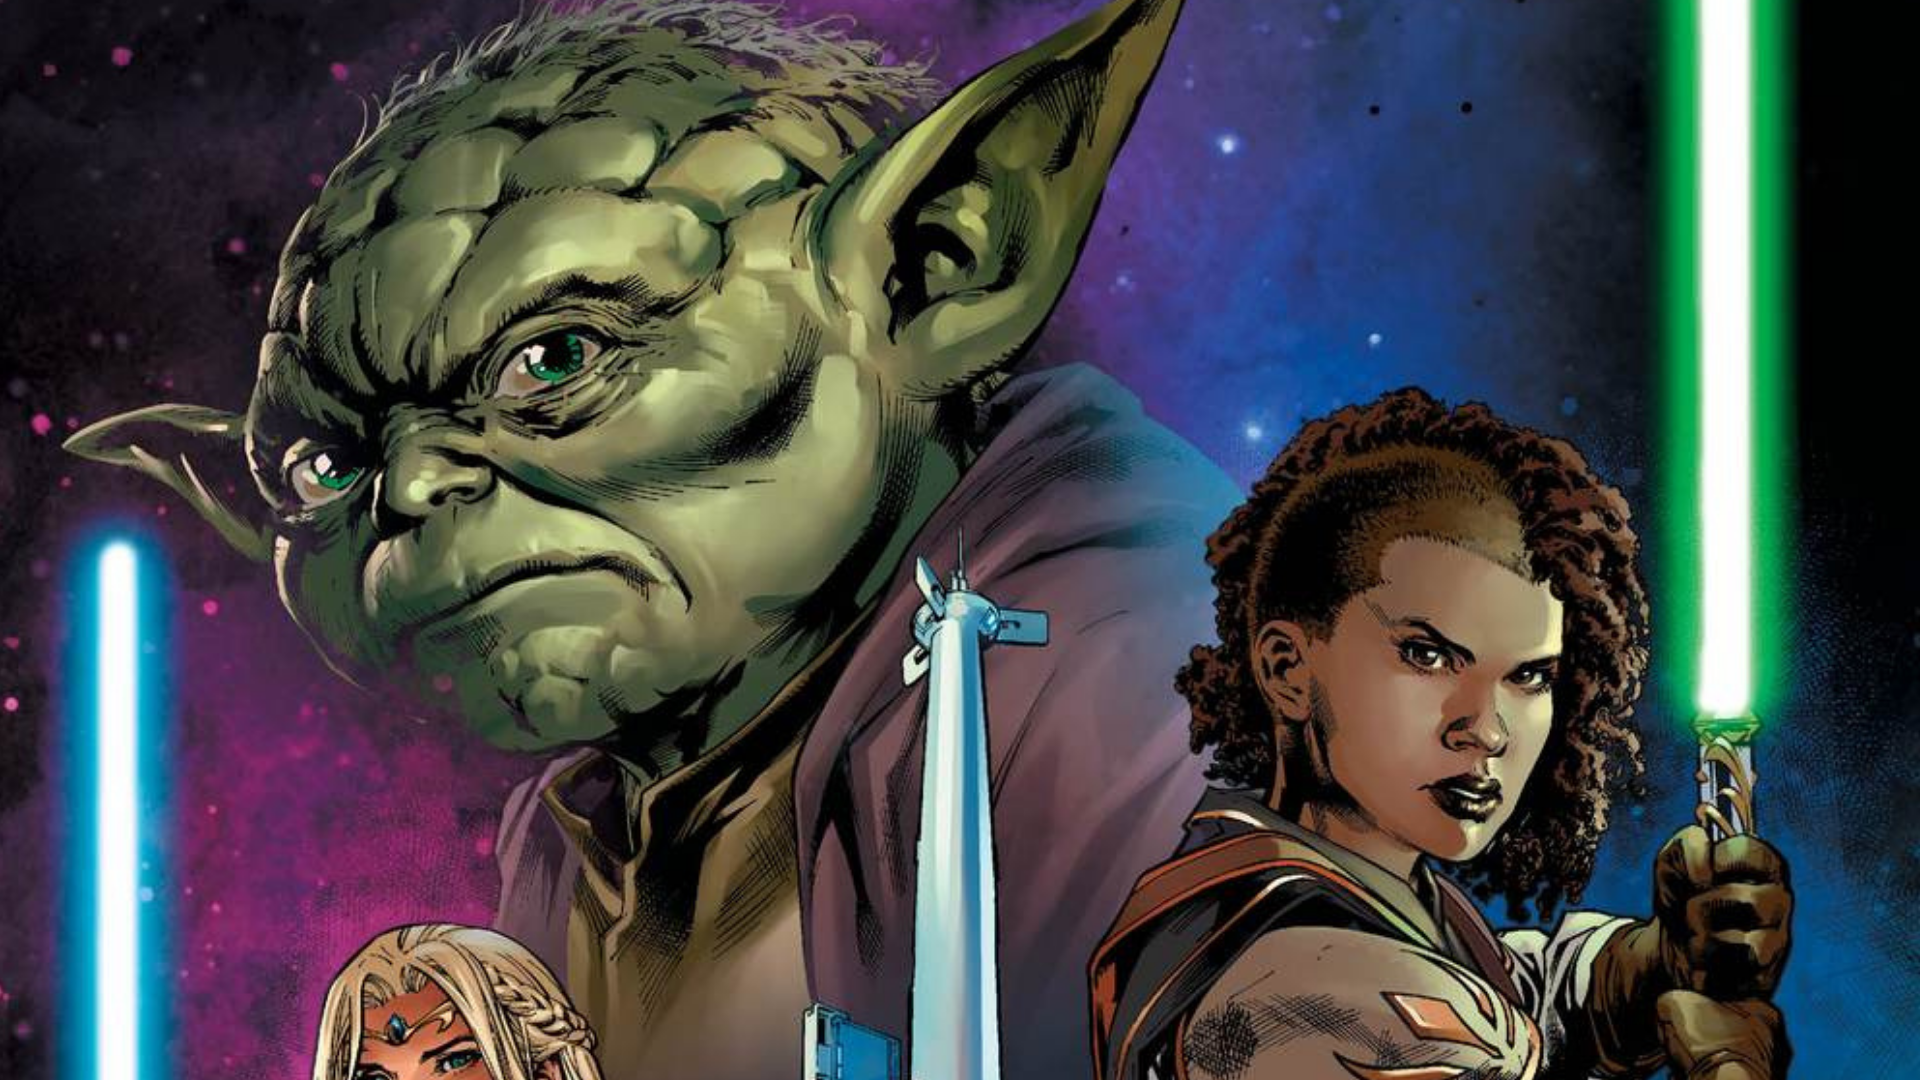 Unknown Comic Books announce exclusive variant of Star Wars: The High Republic